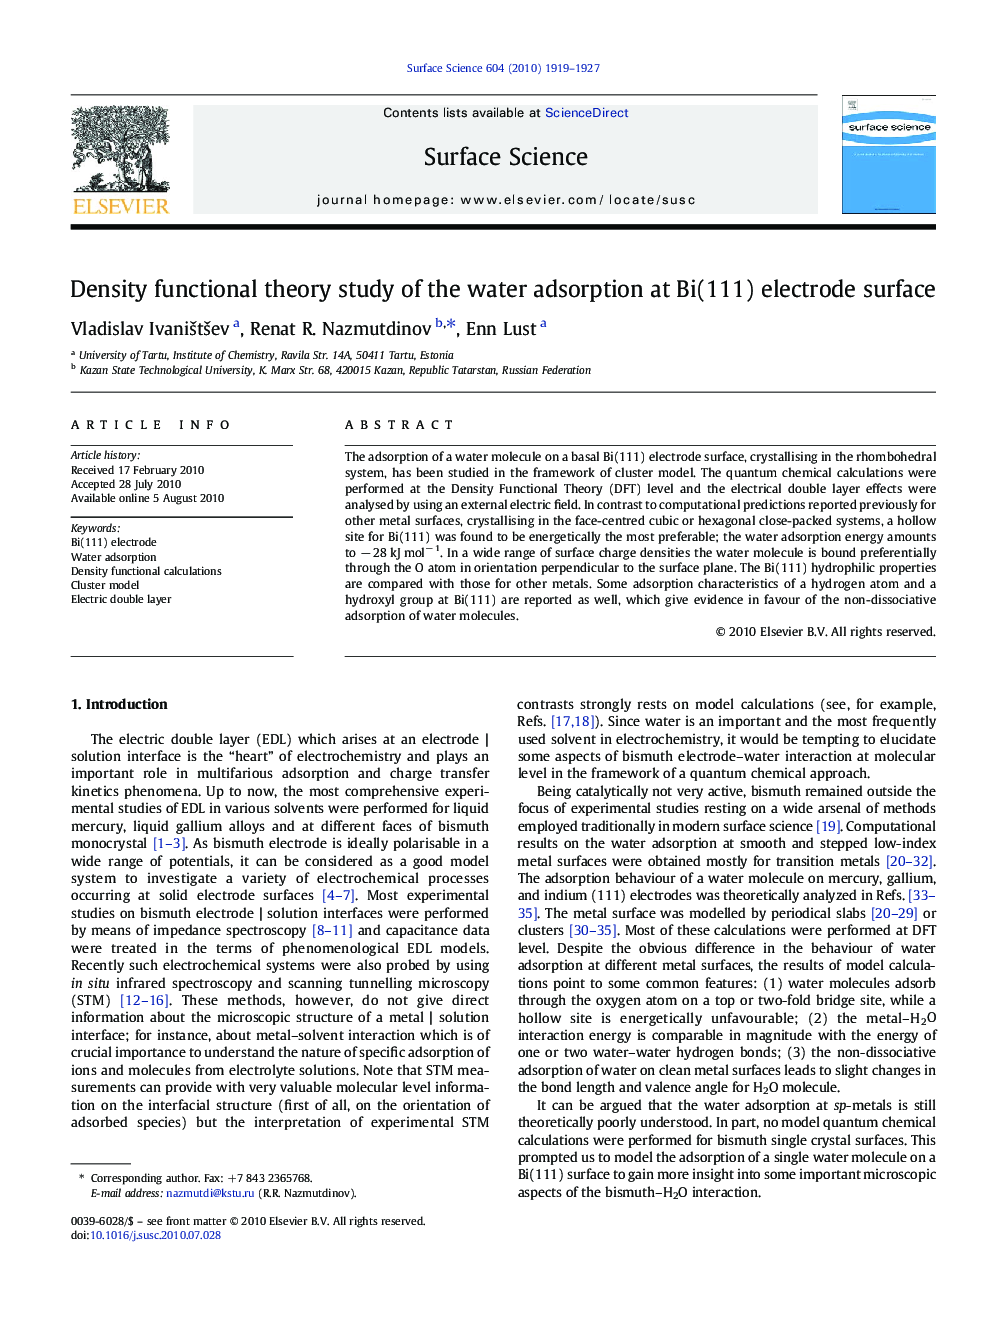 Density functional theory study of the water adsorption at Bi(111) electrode surface